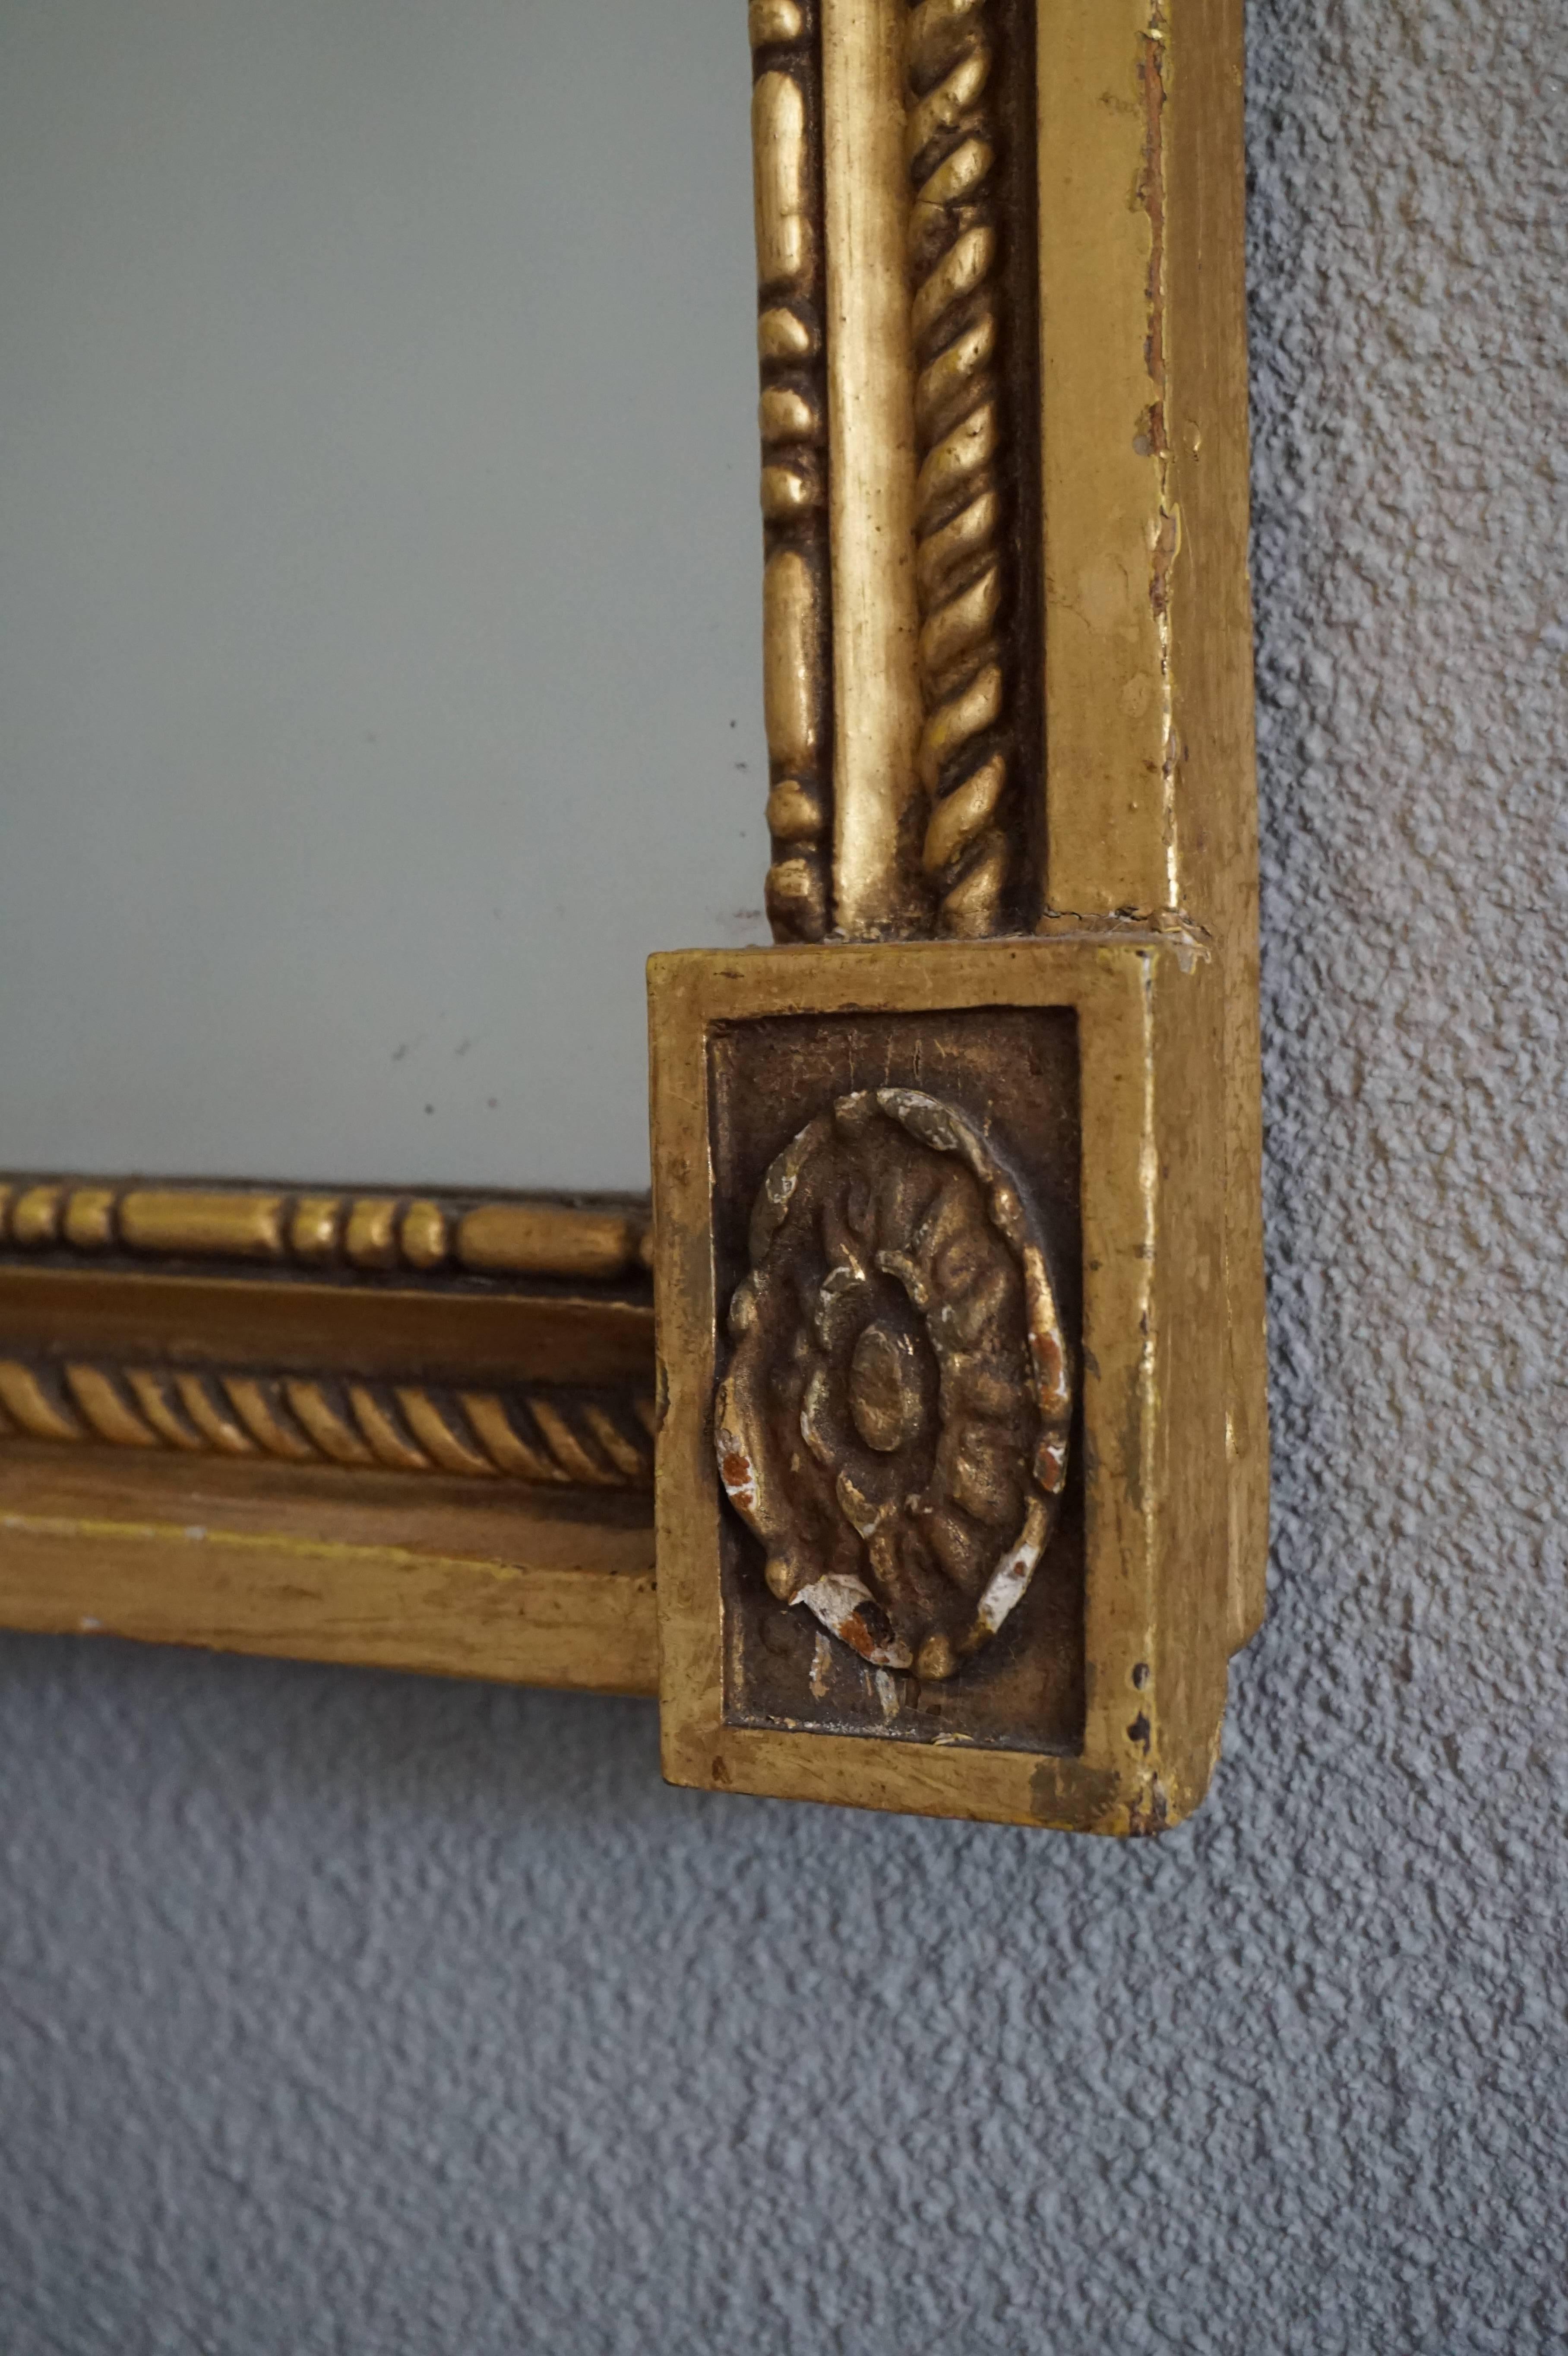 Plaster Mid-19th Century Antique and Gilt Empire/Napoleonic Style Mirror For Sale